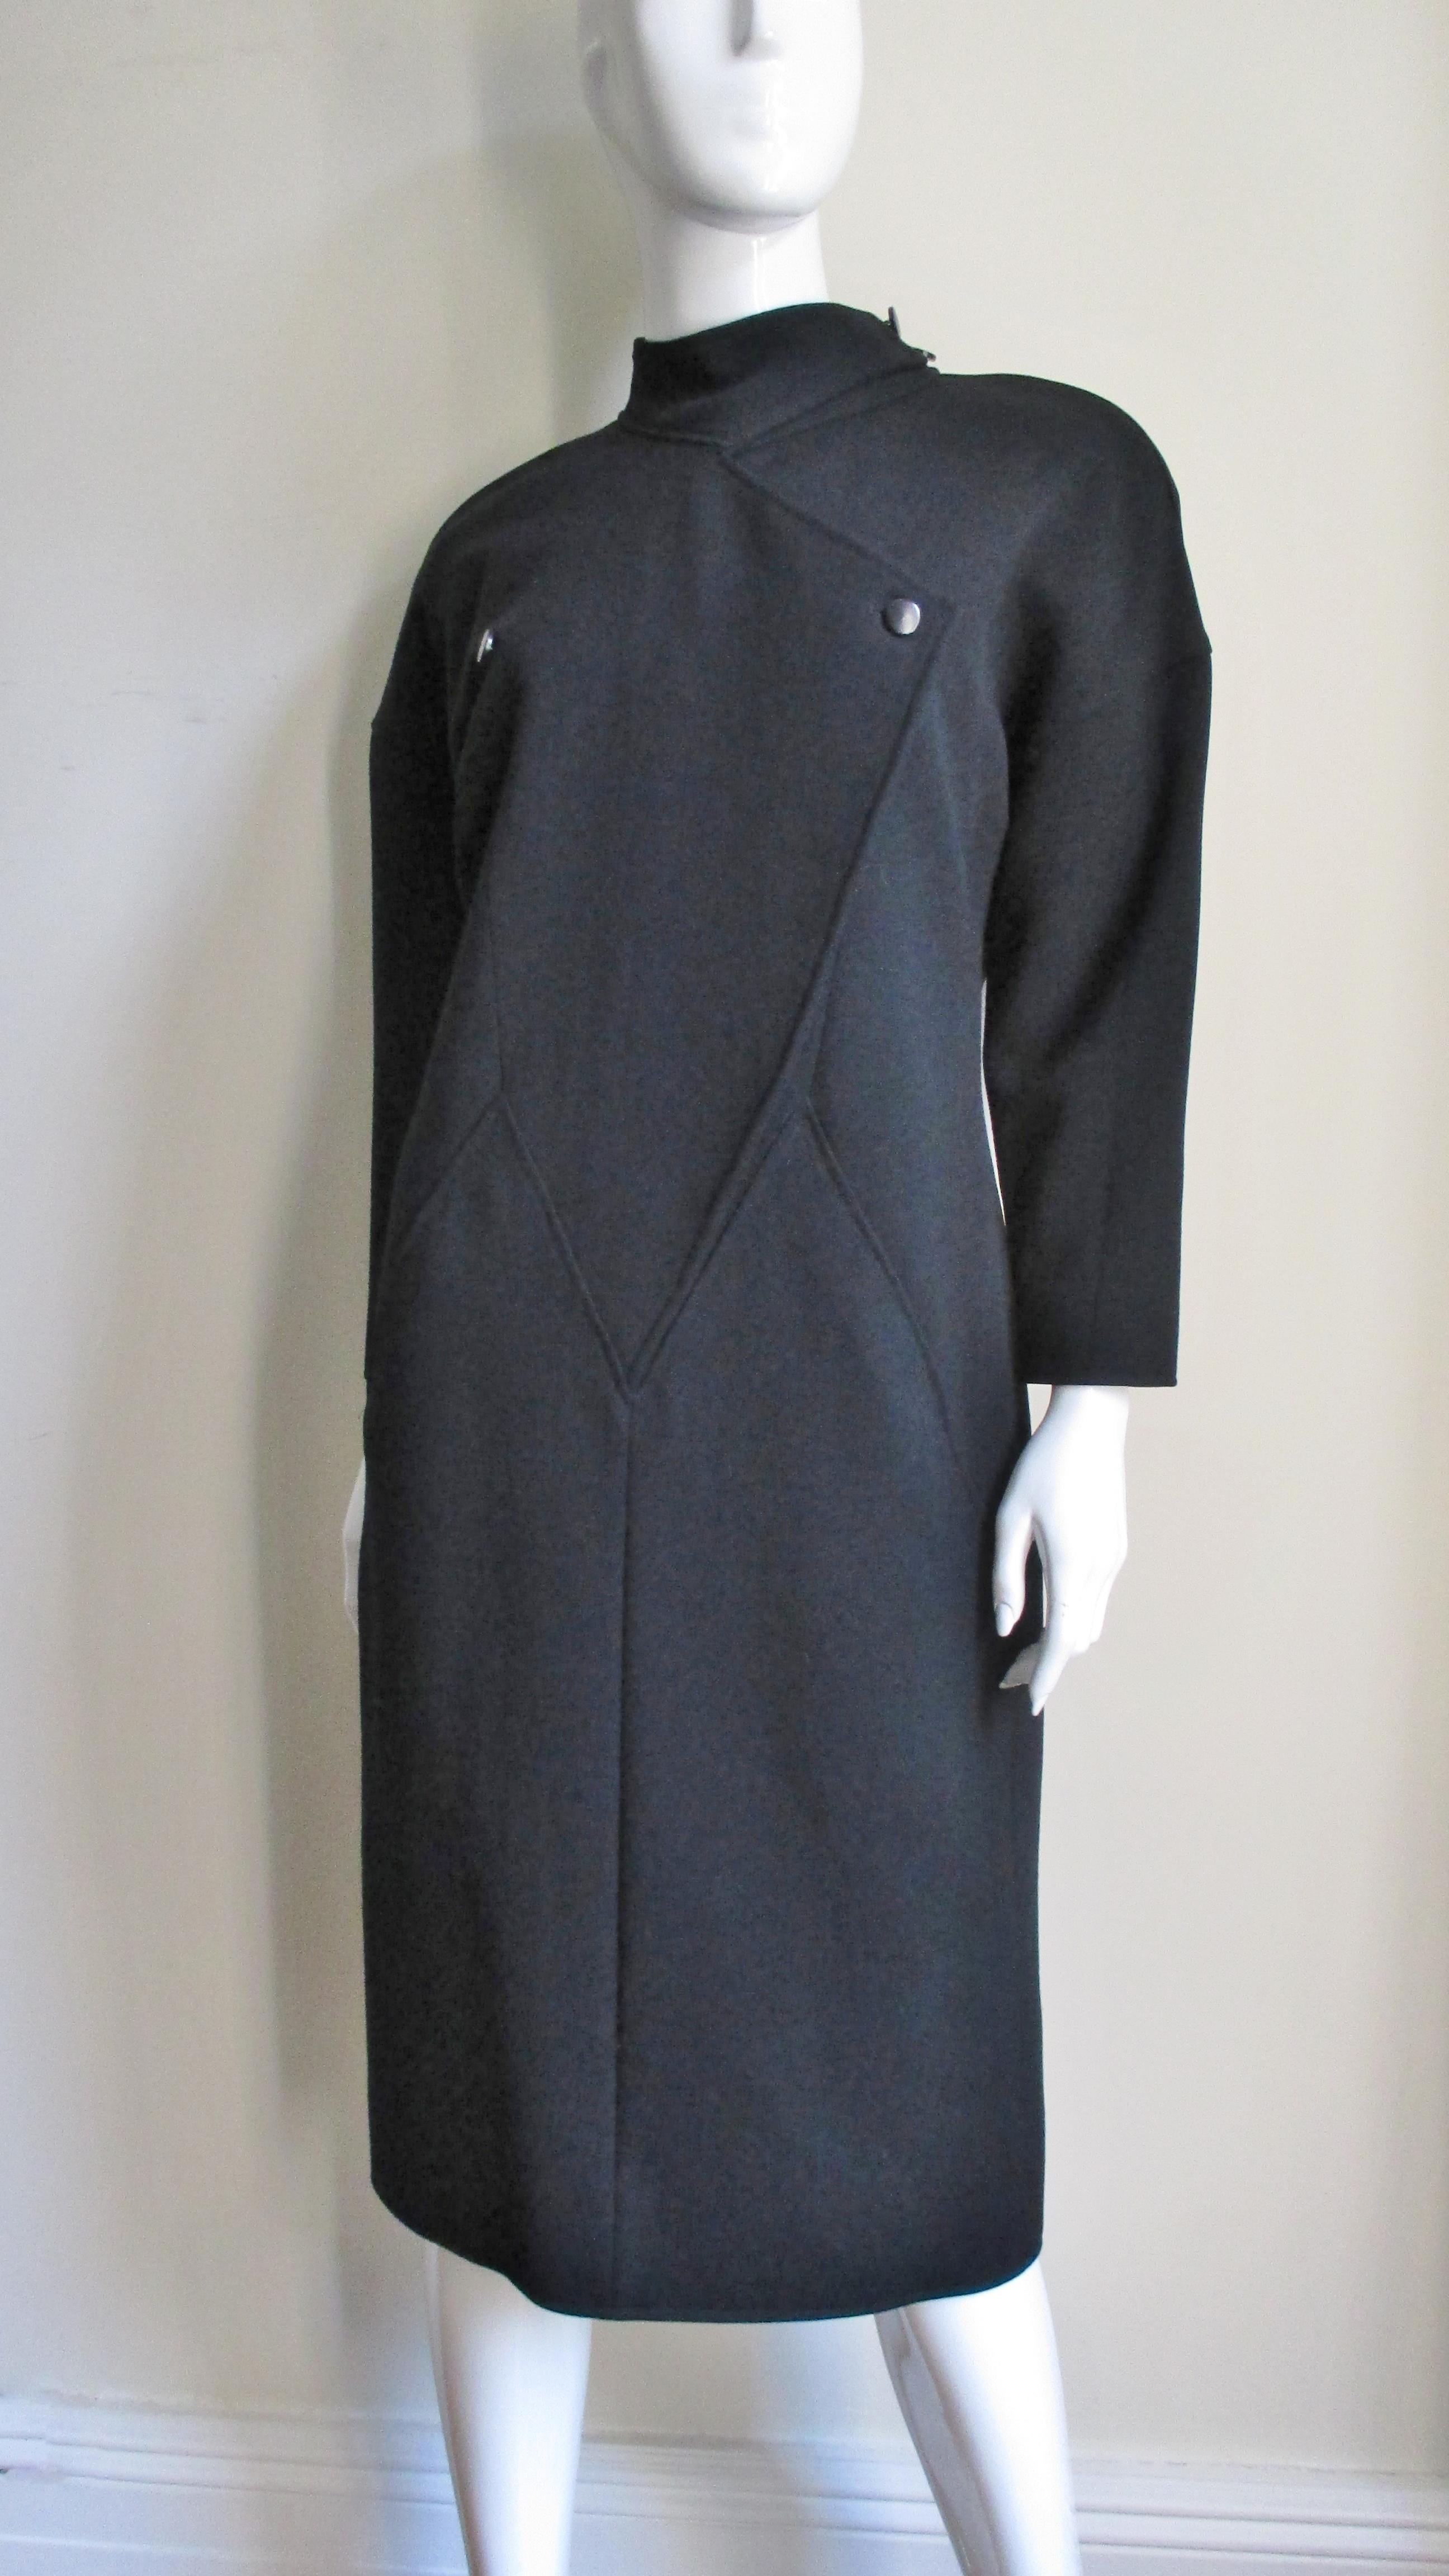 A fabulous black wool dress by Andre Courreges.  It has a stand up collar which buttons on one side, long sleeves, lightly padded shoulders, and 2 front pockets in the seams of the center front. The bodice is joined with the skirt portion by clever